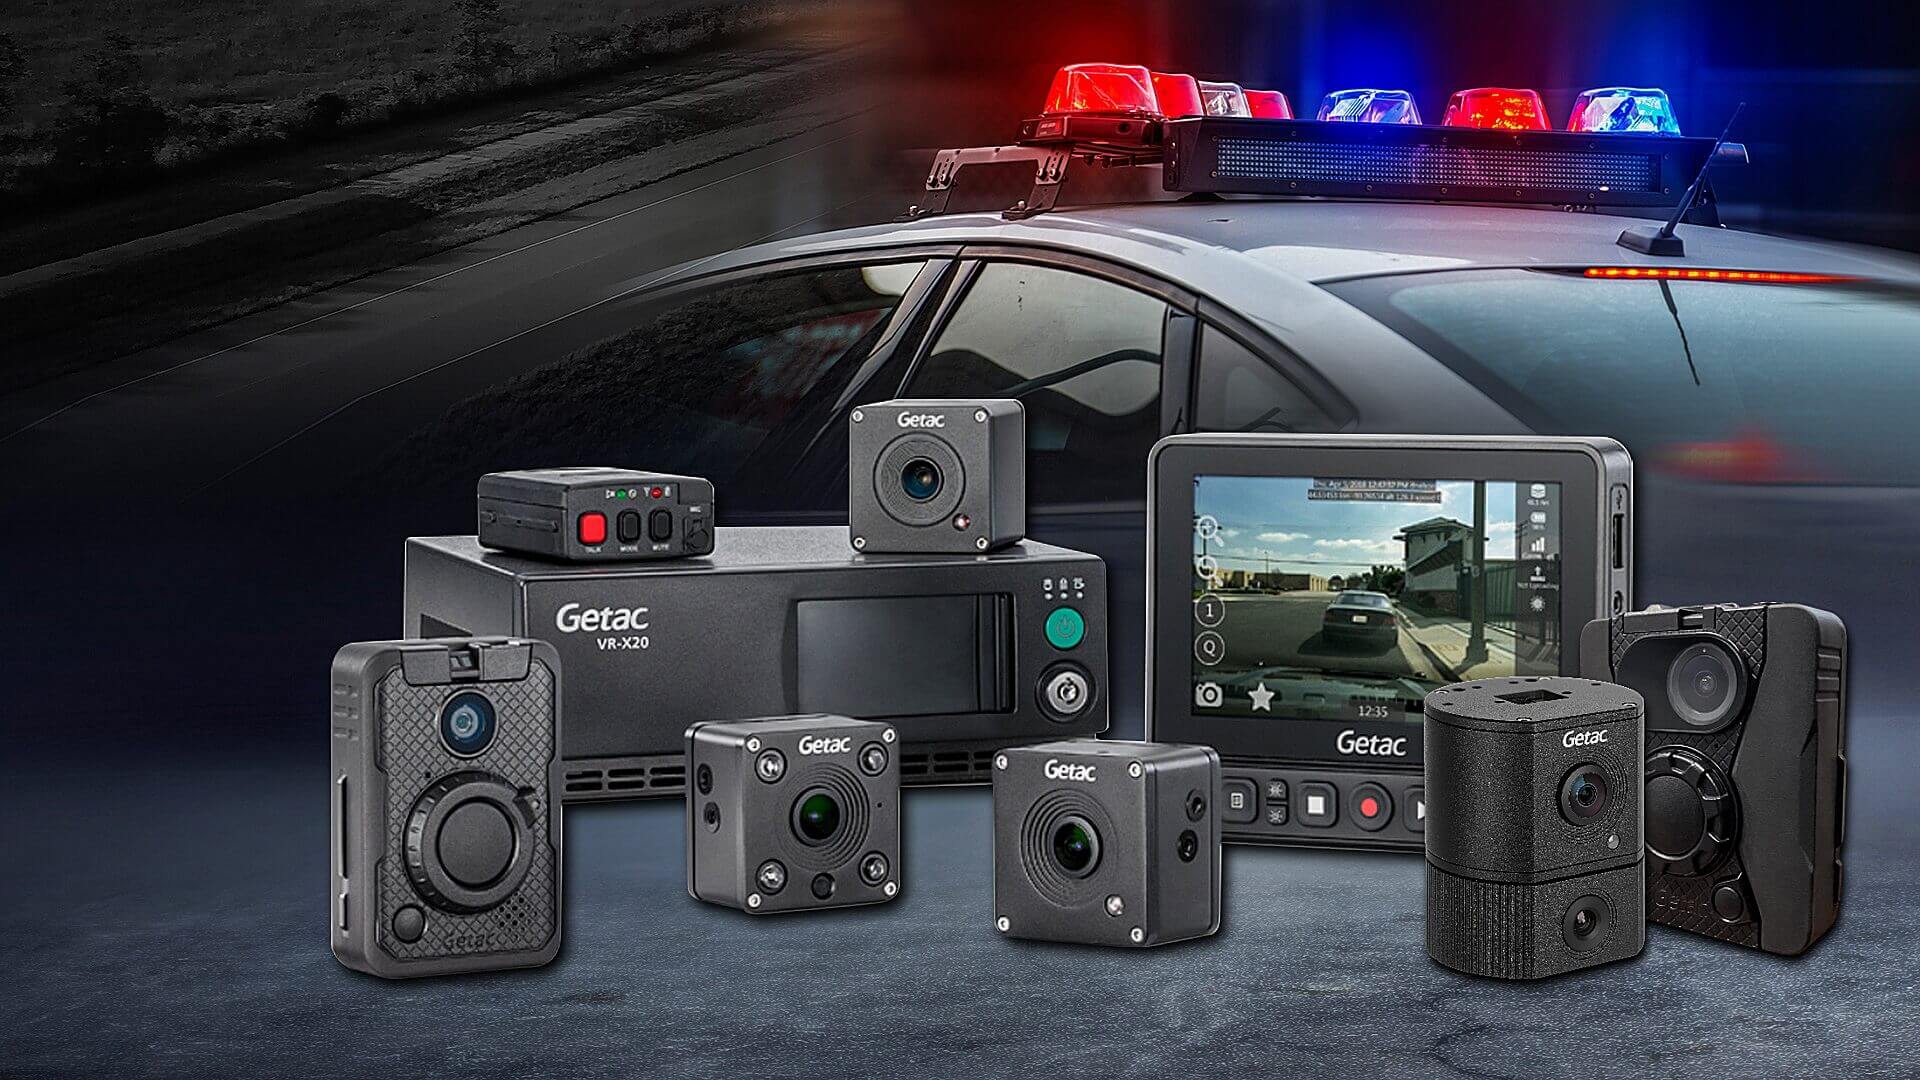 Getac products against the background of a police car